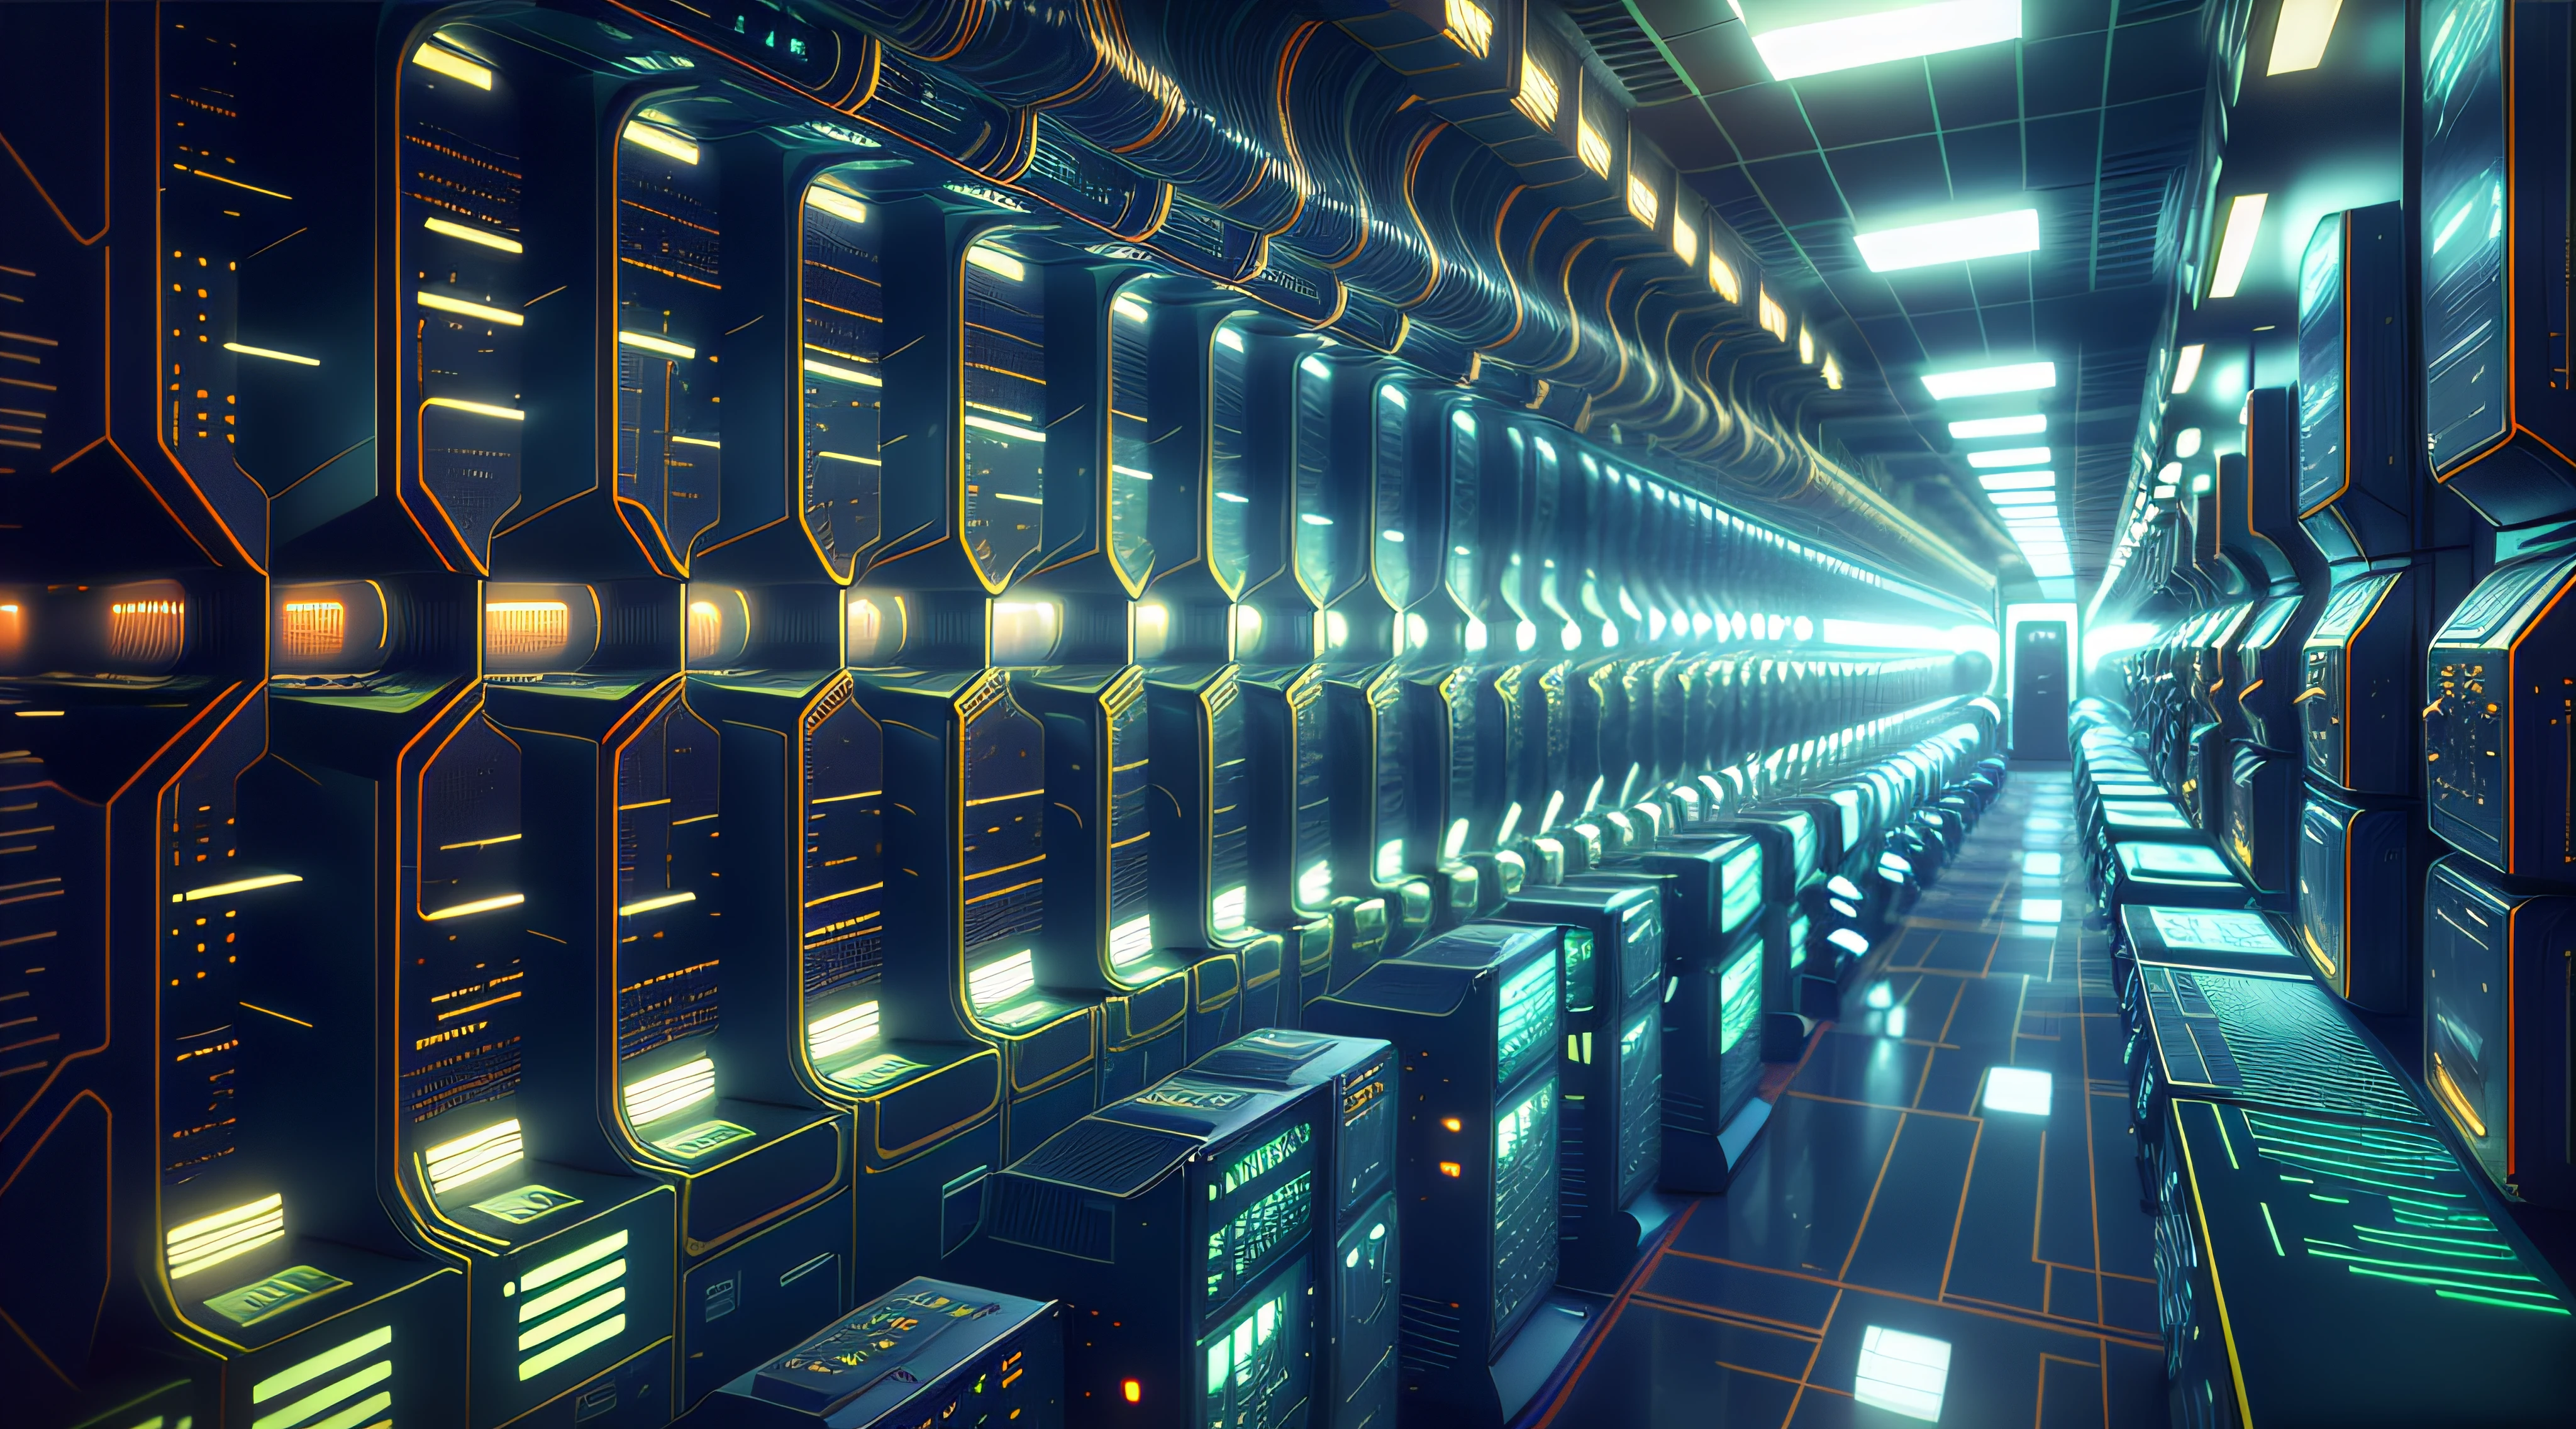 a dimly lit hallway with rows of data and computer screens, background is data server room, hacking into the mainframe, cyber space, in realistic data center, 3840x2160, 3840 x 2160, spaceship hallway background, cyber architecture, surreal cyberspace, in detailed data center